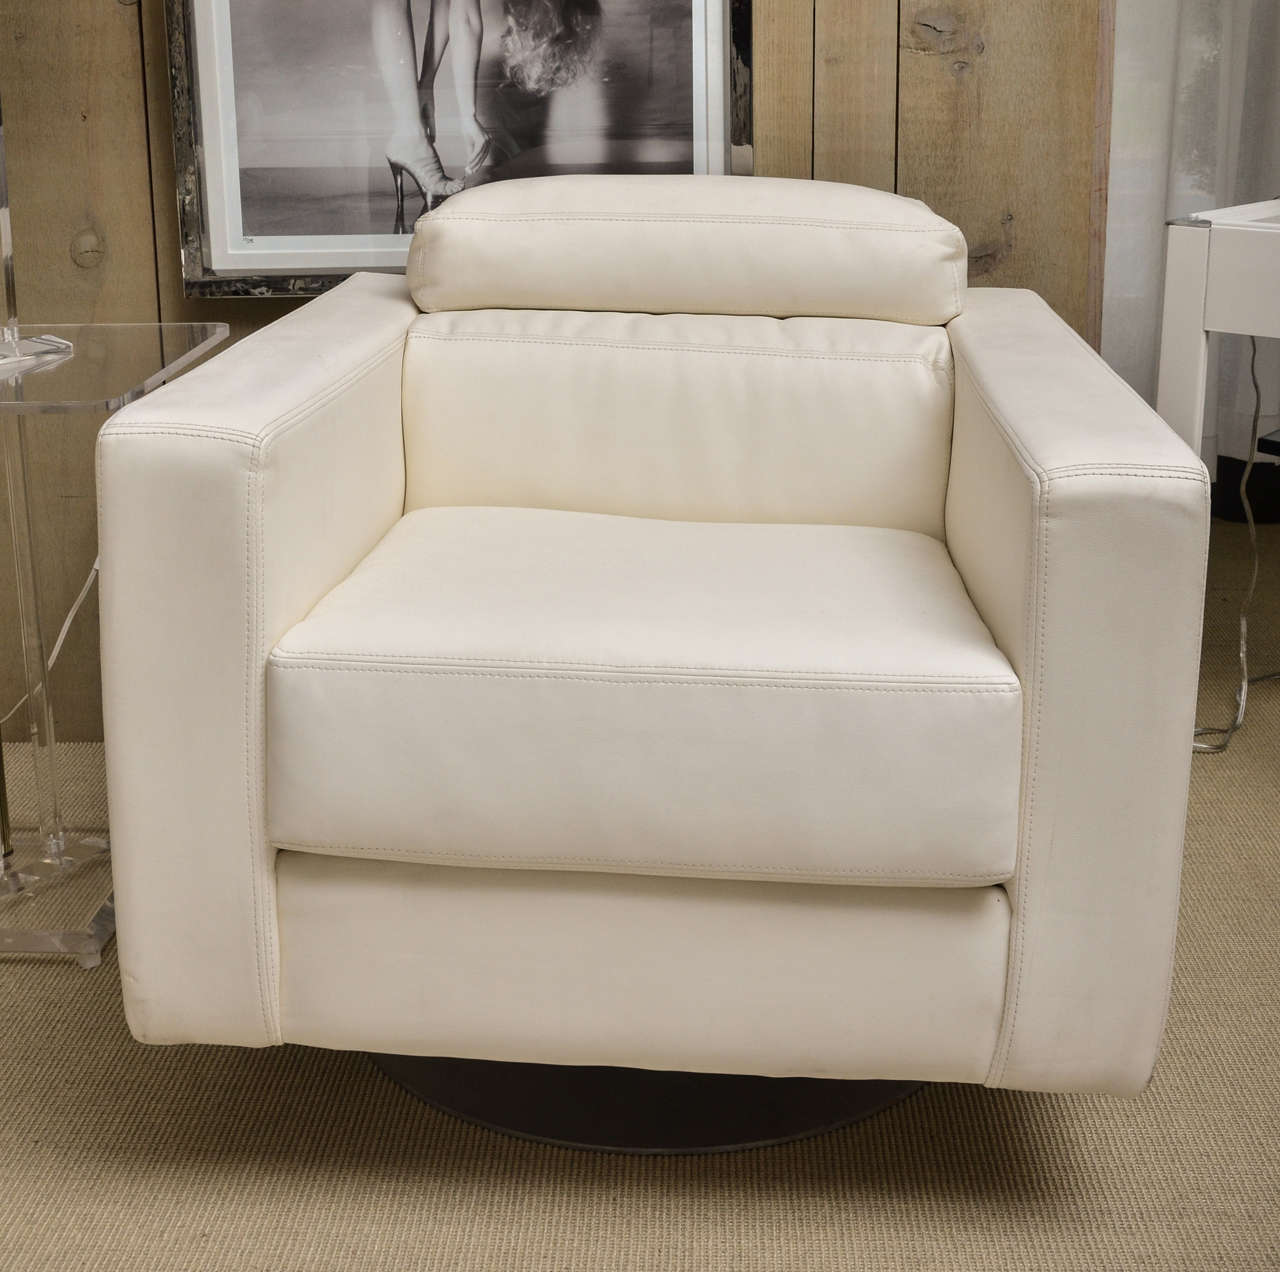 Attractive pair of white leather arm chairs which swivel in the style of Milo Baughman